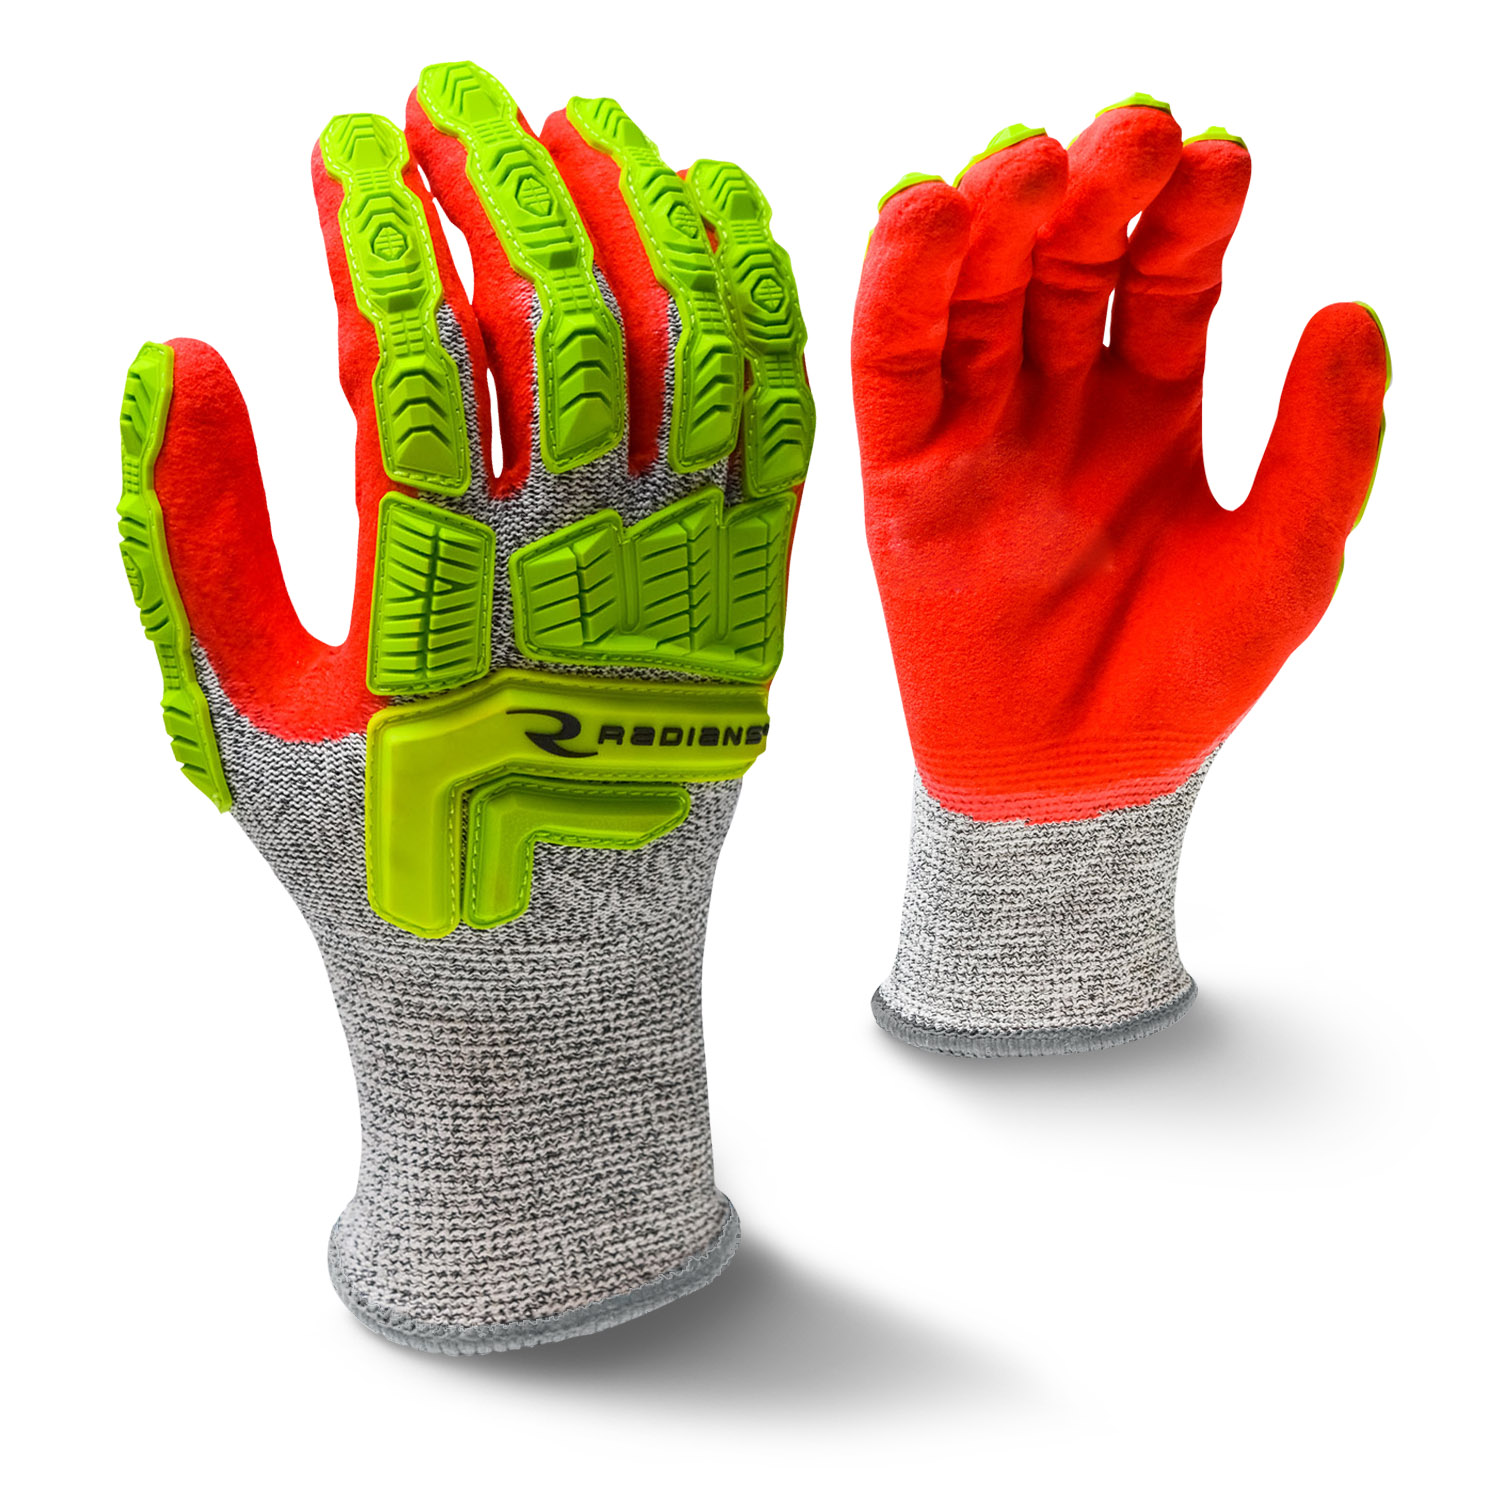 Tsunami Grip® Light Mach Finish Nitrile-Coated Gloves with Cut, Abrasion,  and Puncture Resistance